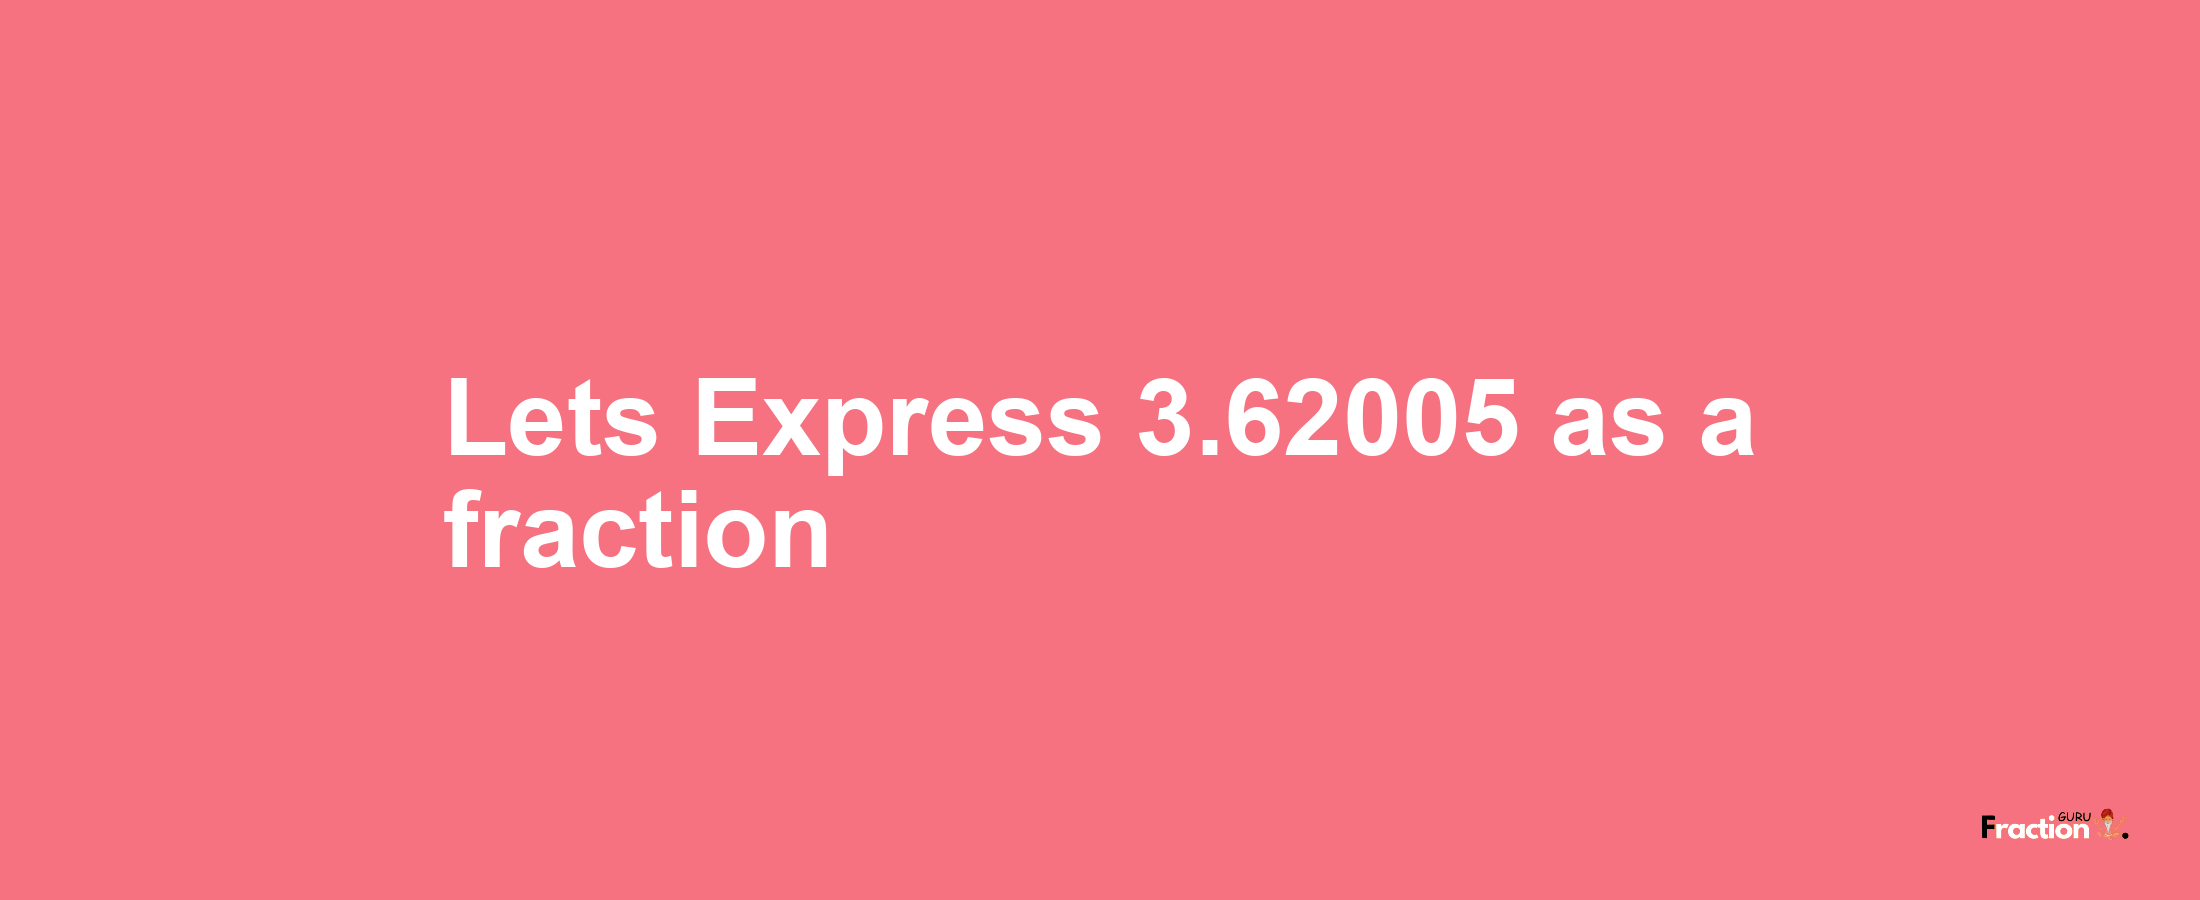 Lets Express 3.62005 as afraction